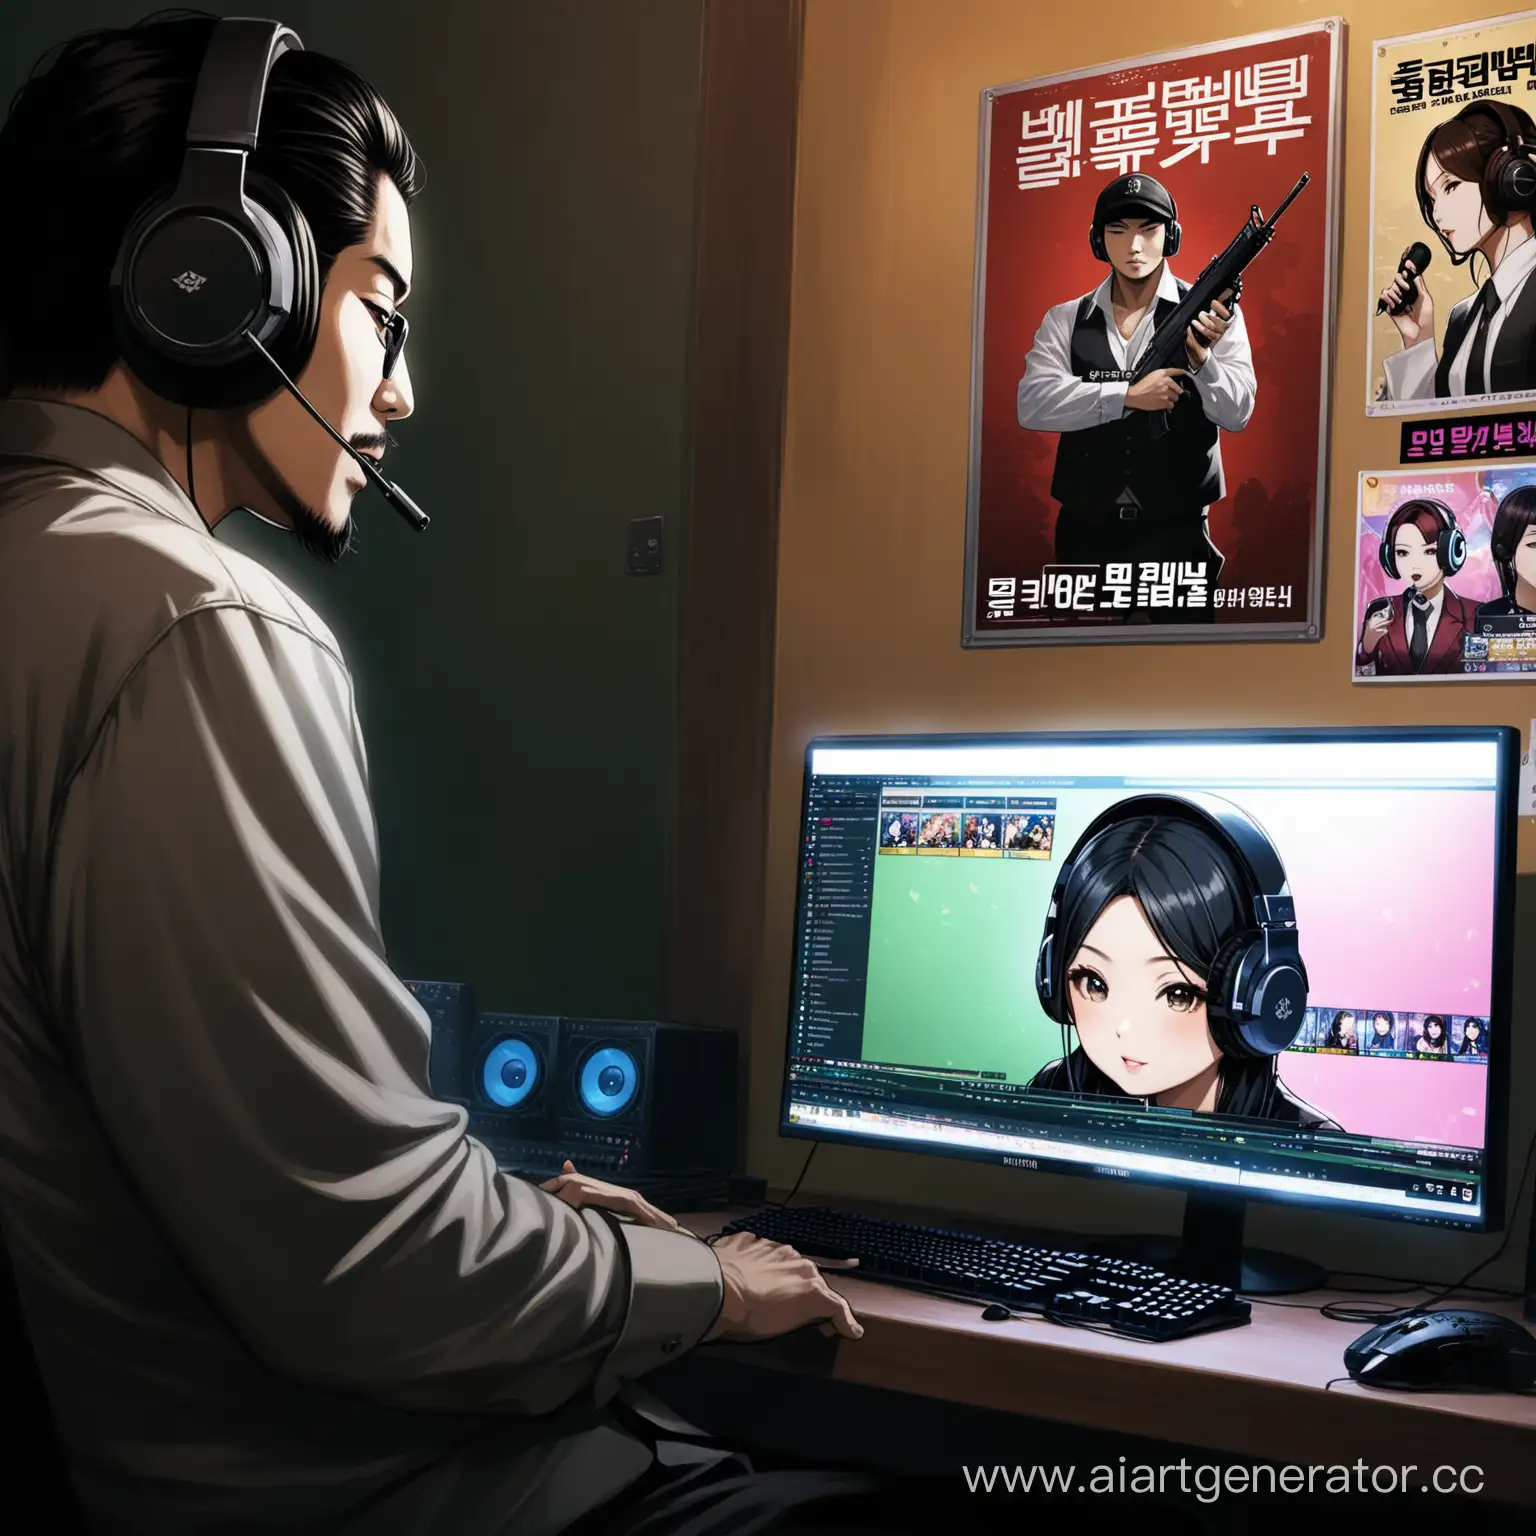 Japanese-Mafia-Member-Playing-CounterStrike-in-Room-with-Korean-Singer-Posters